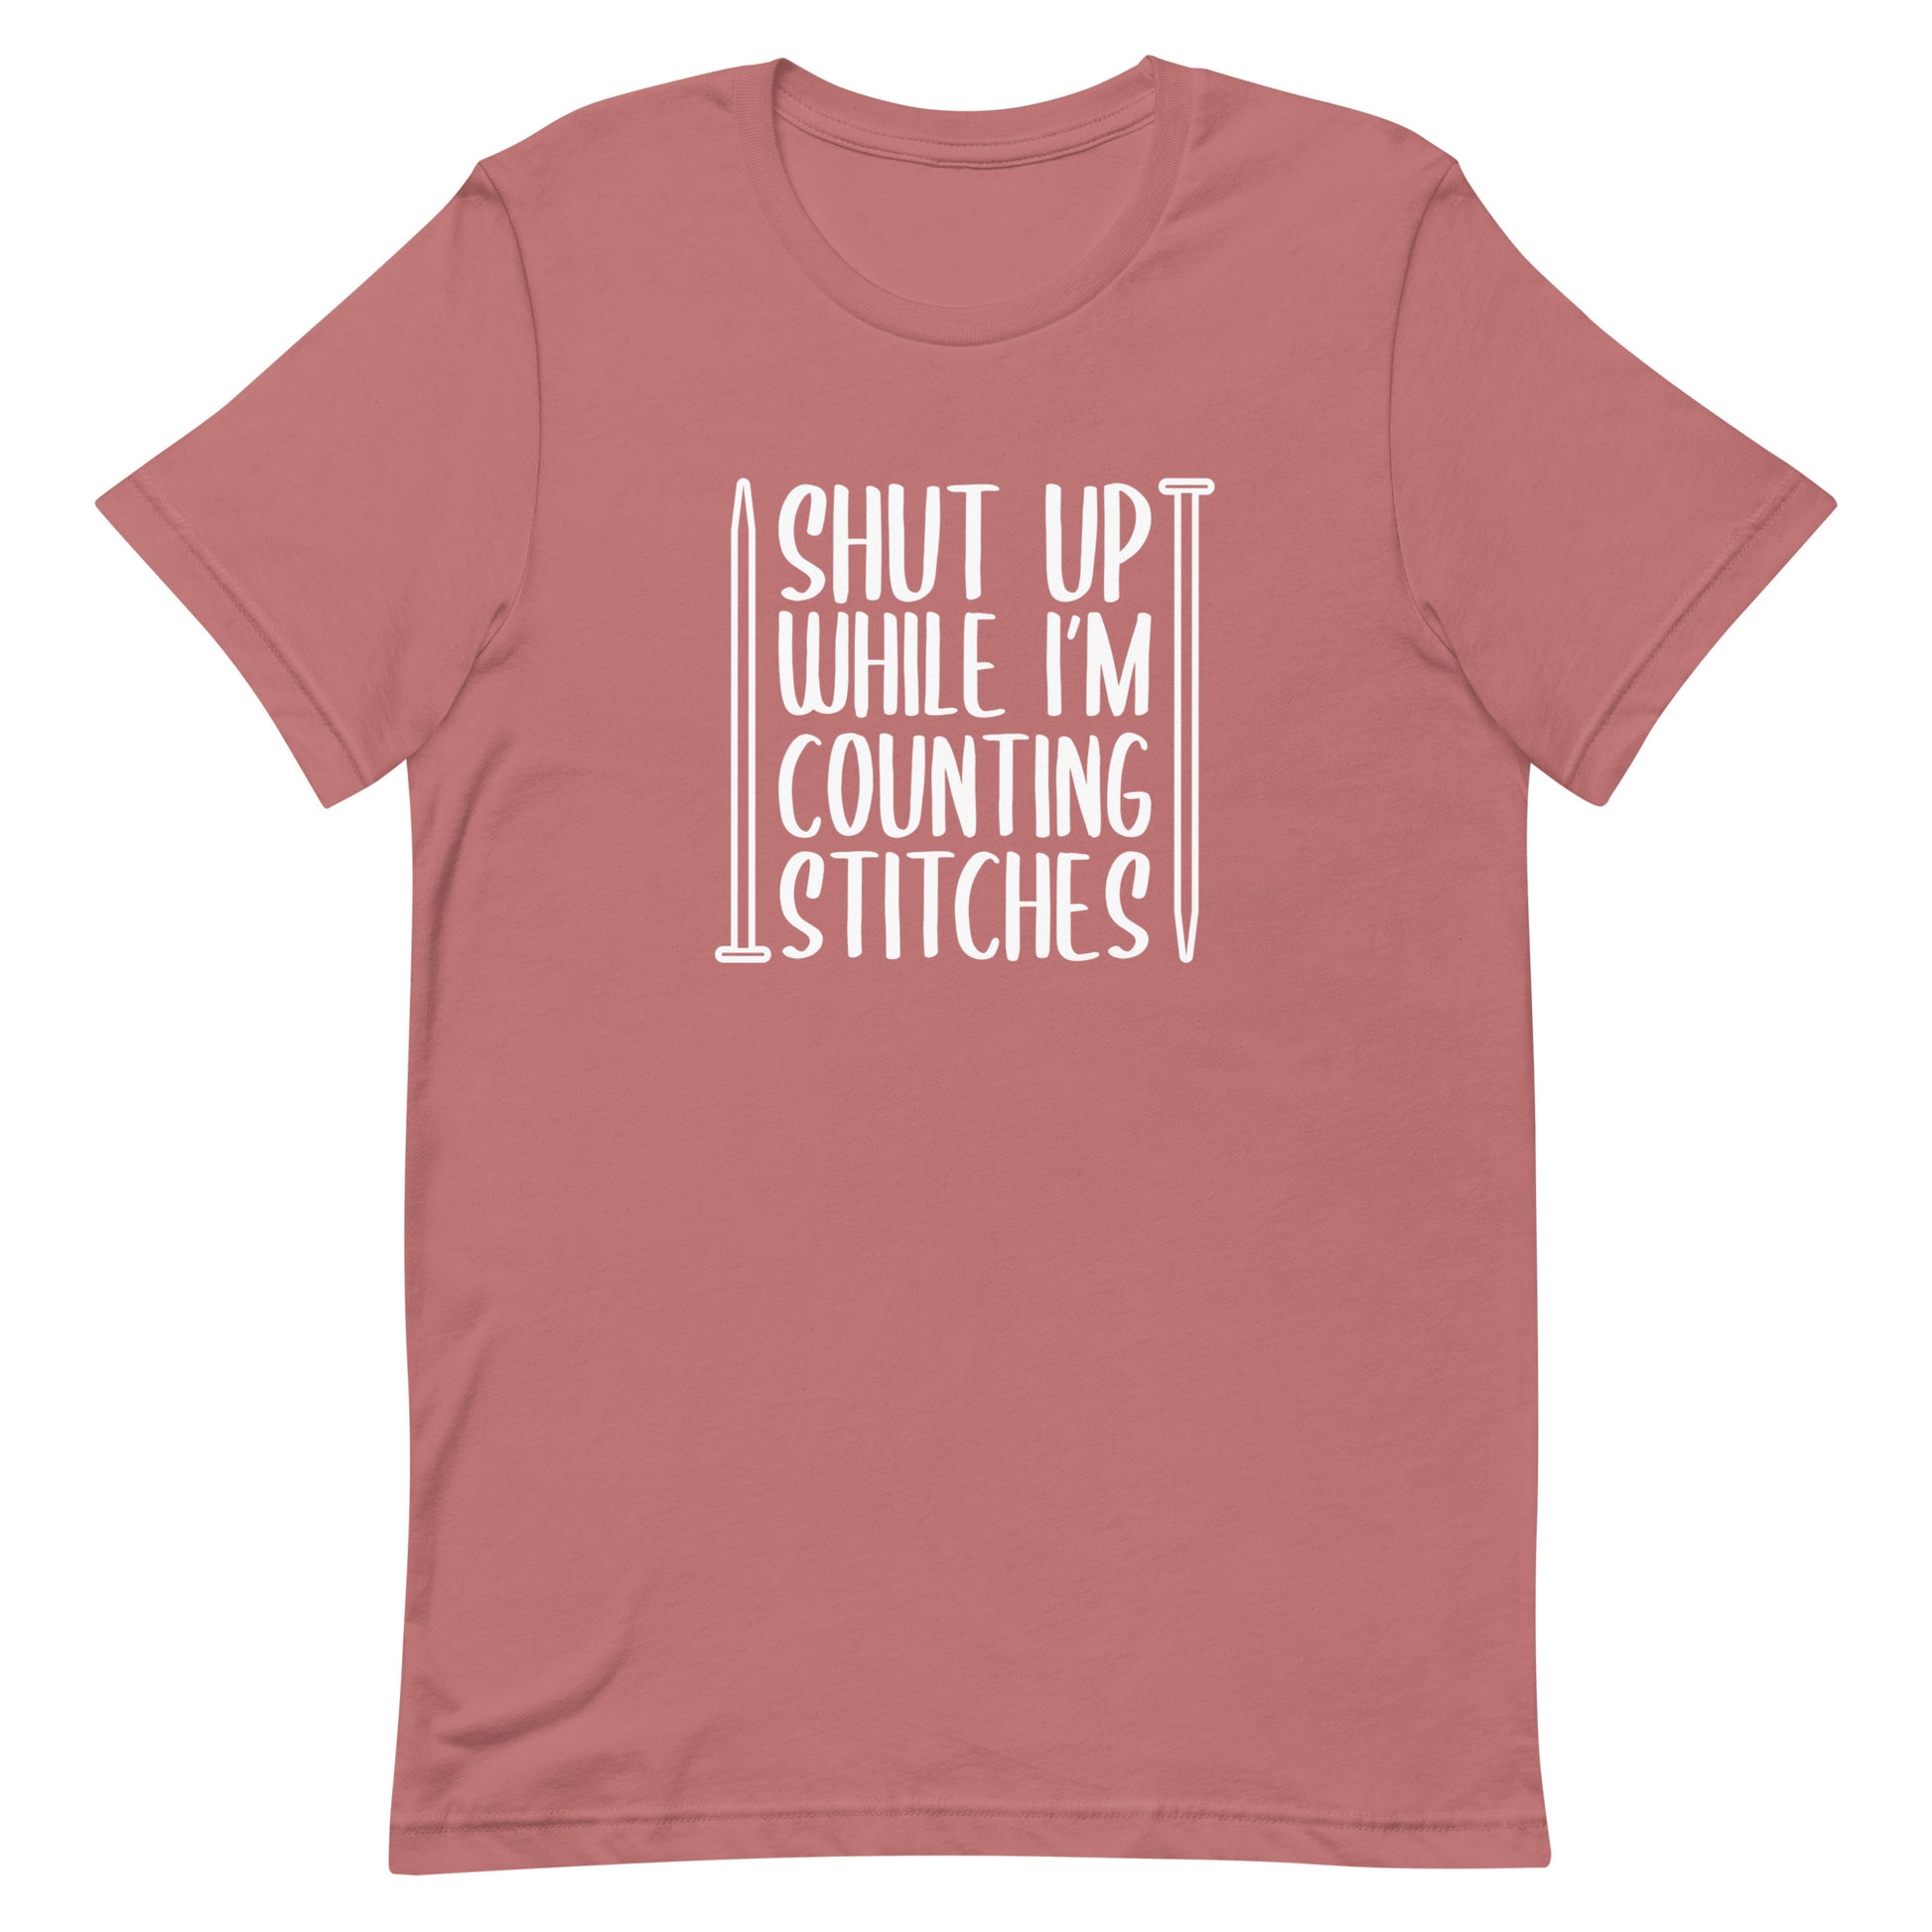 A dusky pink crewneck t-shirt with white text surrounded by two knitting needles. The text reads "Shut up while I'm counting stiches".